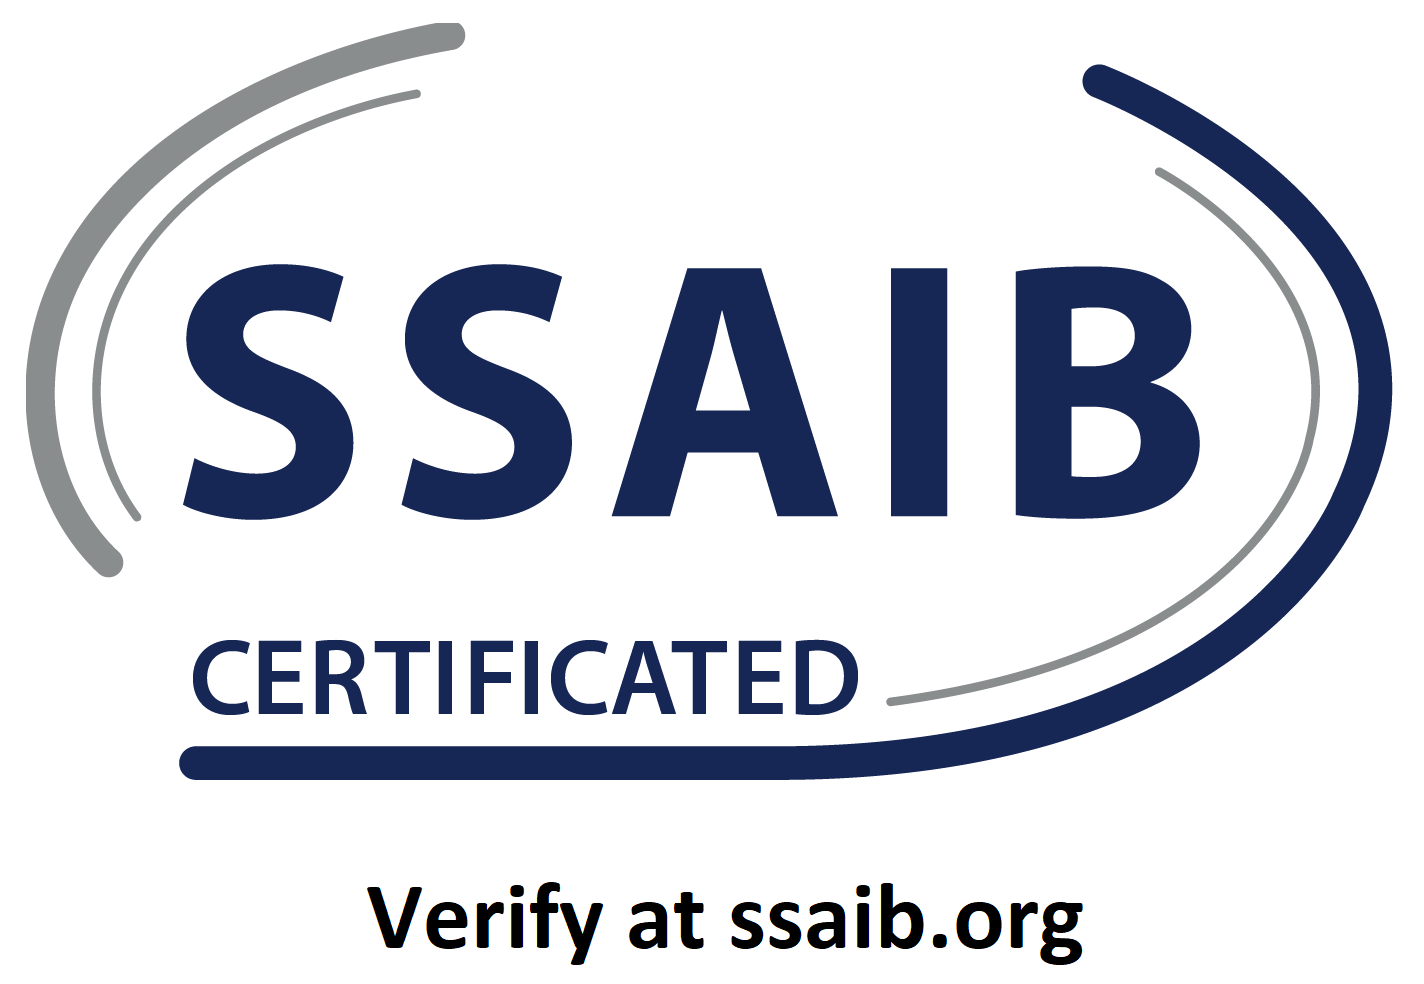 SSAIB Registered & Accredited